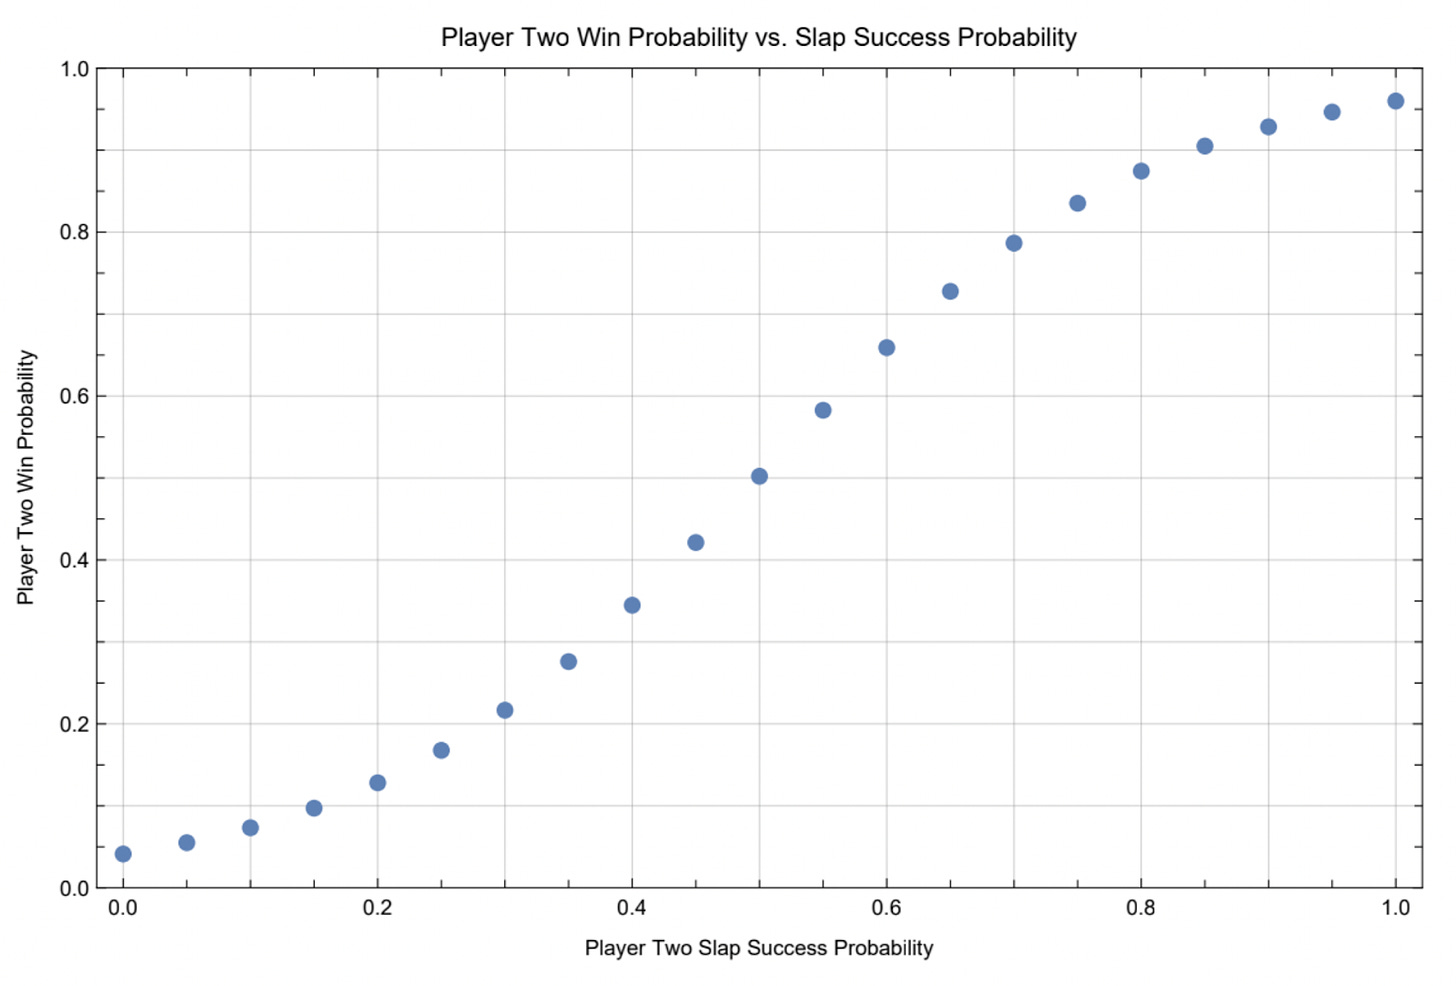 Graph showing Player Two Win Probability (vertical axis) vs. Player Two Slap Success Probability (horizontal axis). Points are plotted at horizontal intervals of 0.05. The resulting curve is logistic in shape.